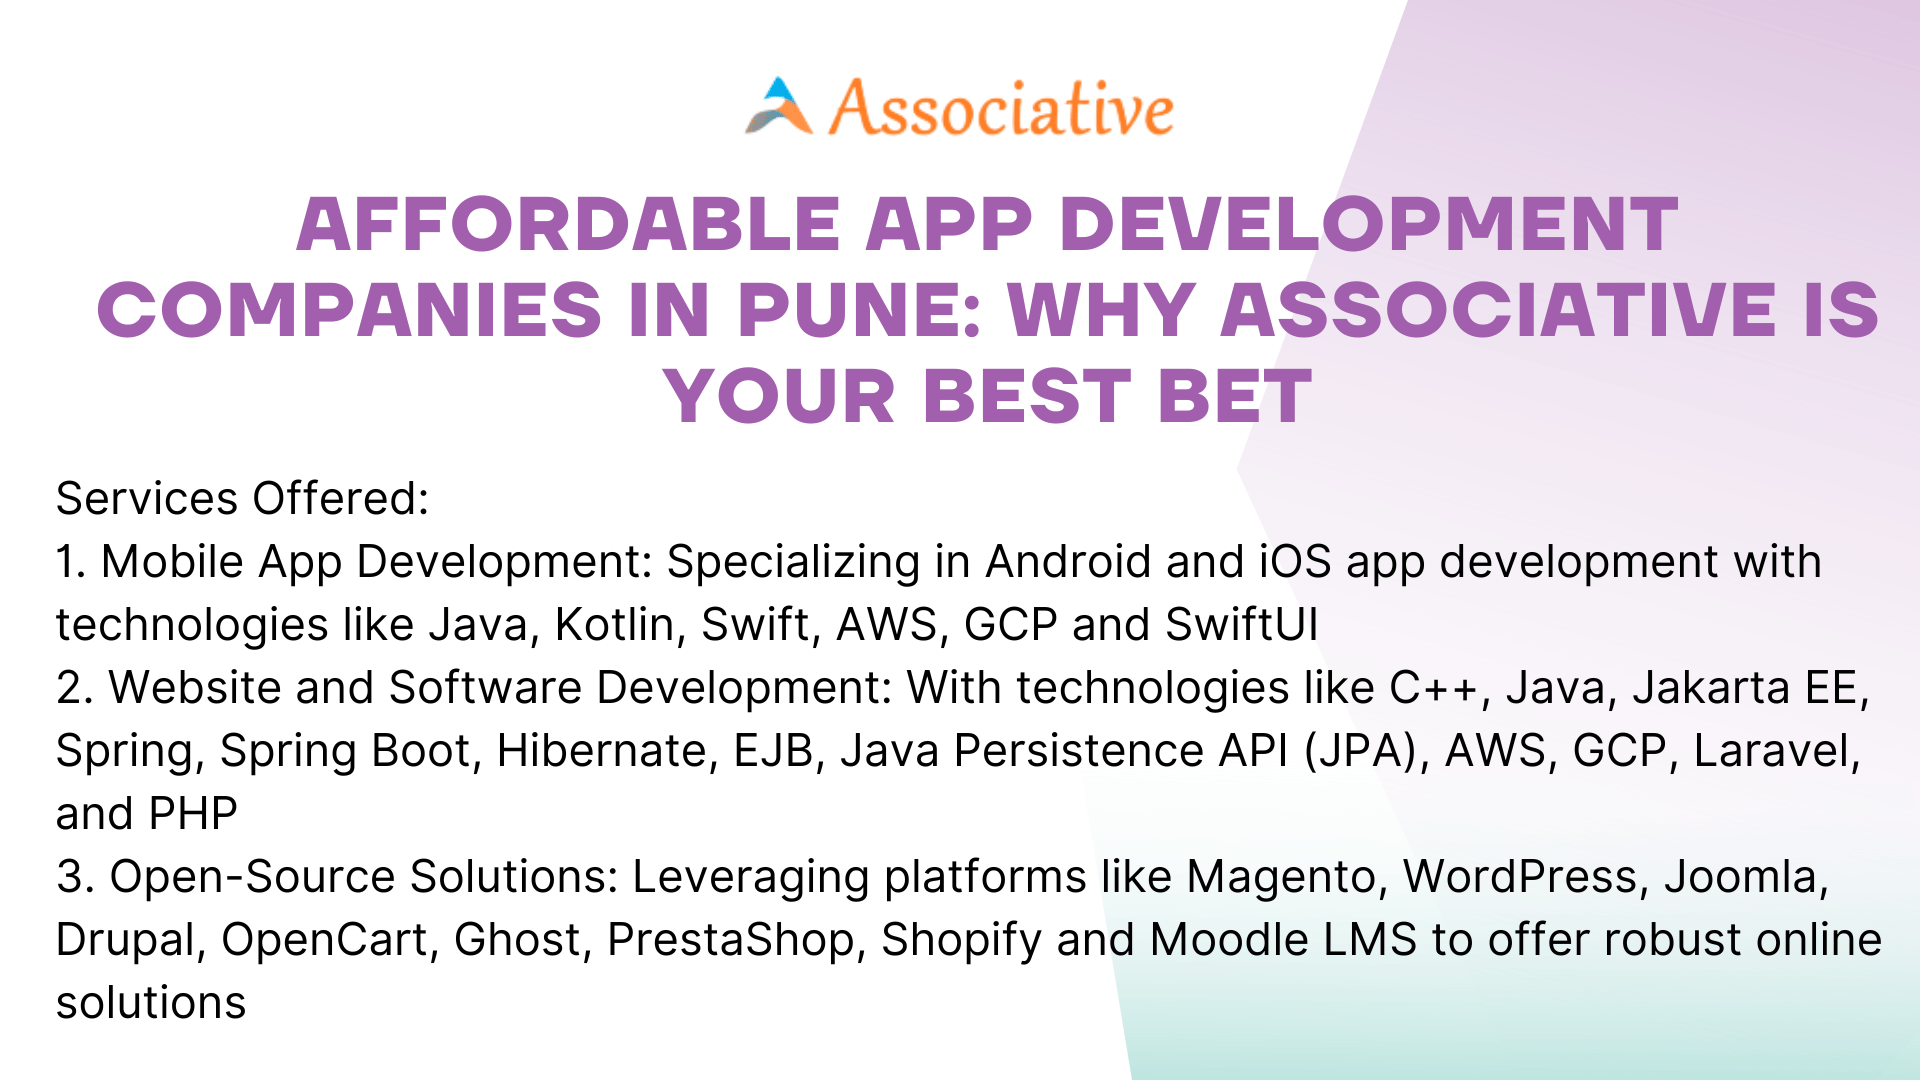 Affordable App Development Companies in Pune Why Associative is Your Best Bet